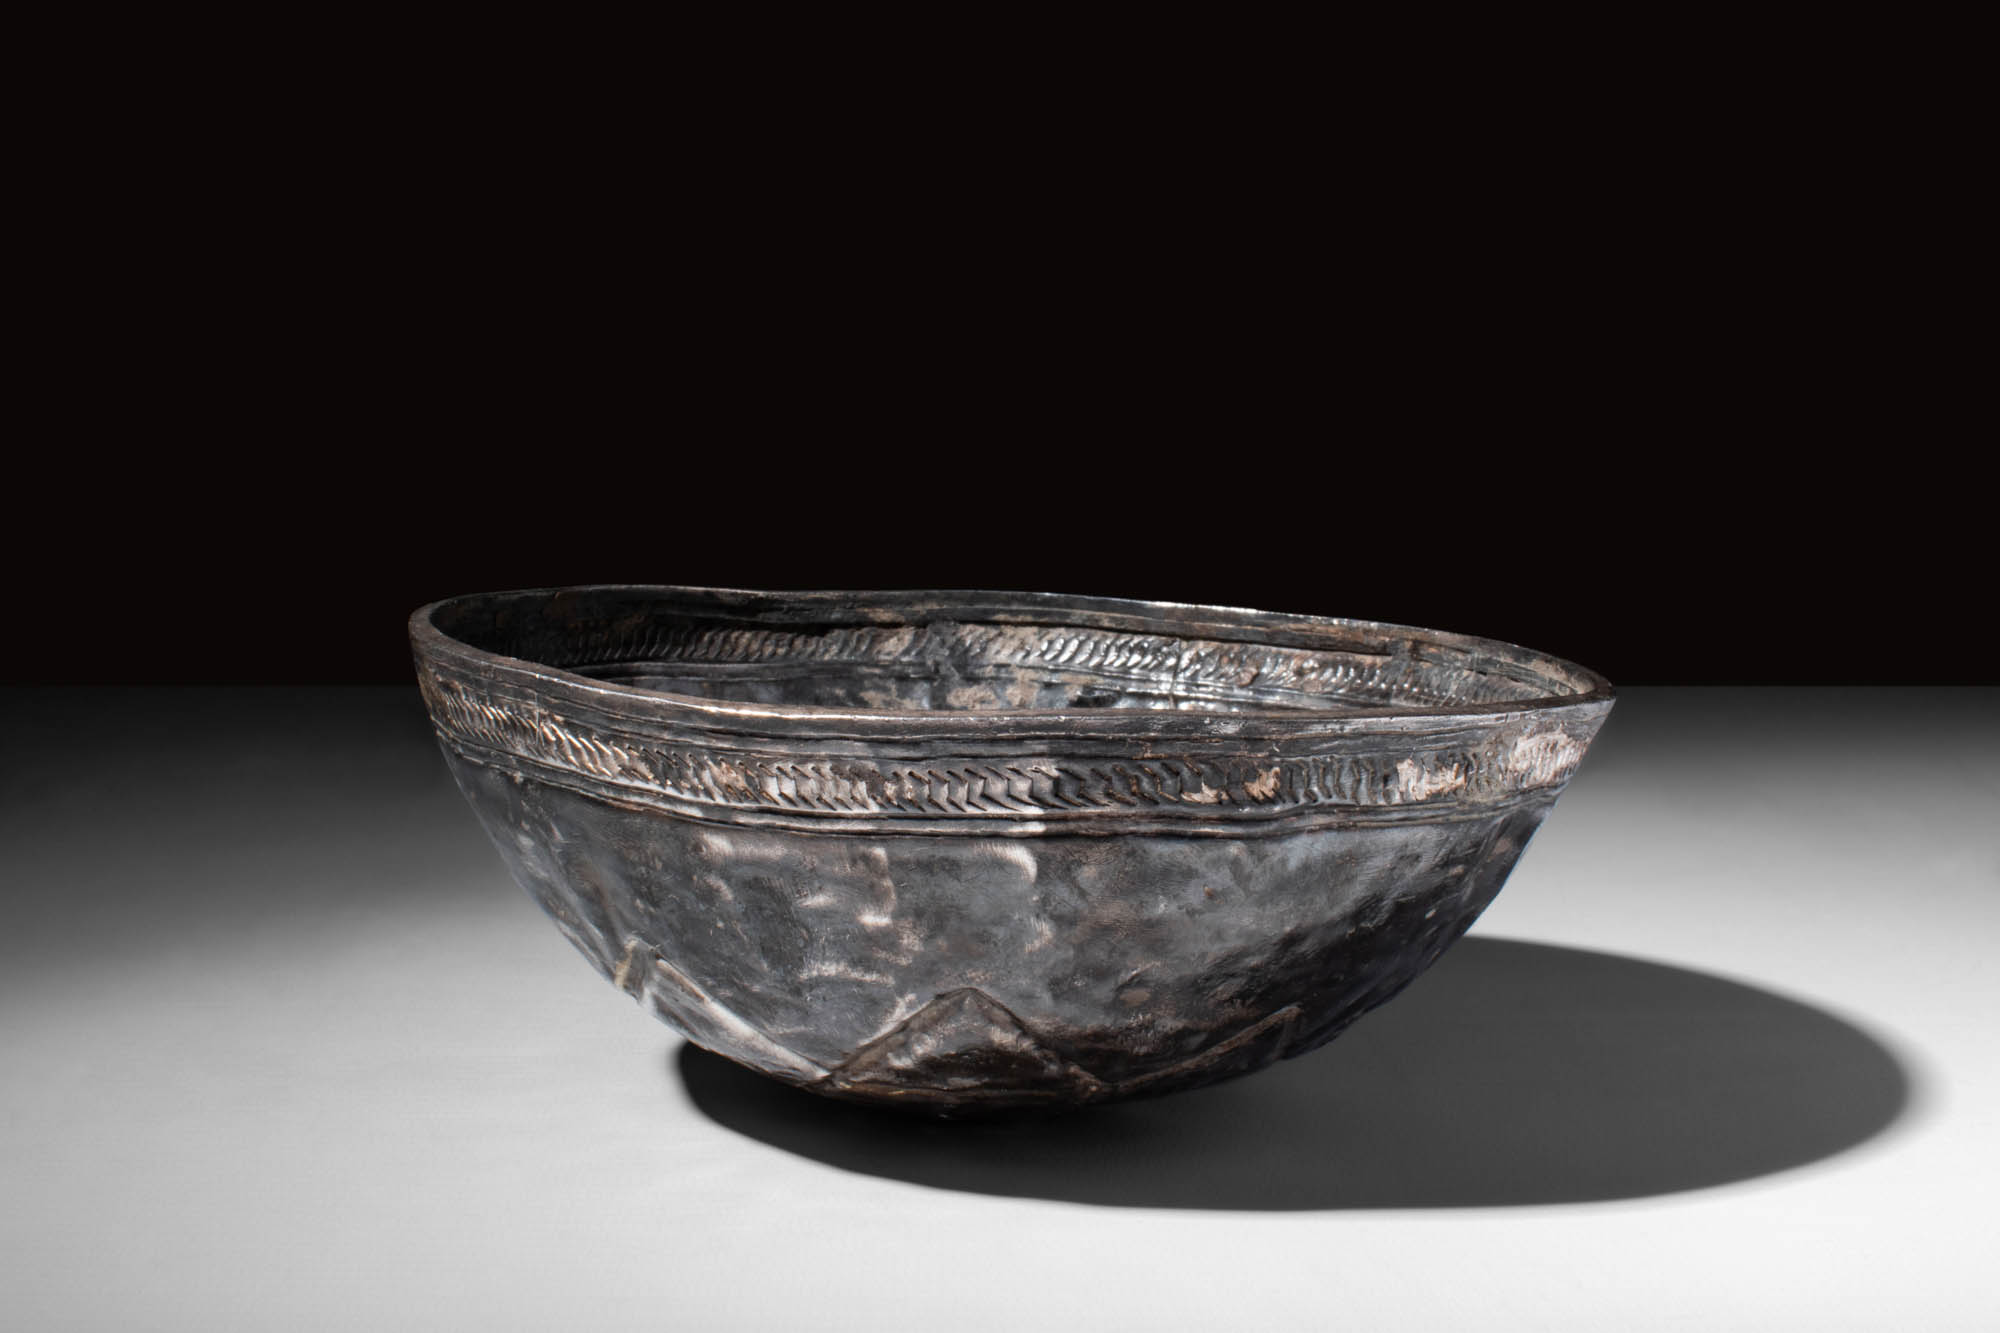 SASANIAN SILVER BOWL DECORATED WITH A GEOMETRIC STAR - Image 2 of 3